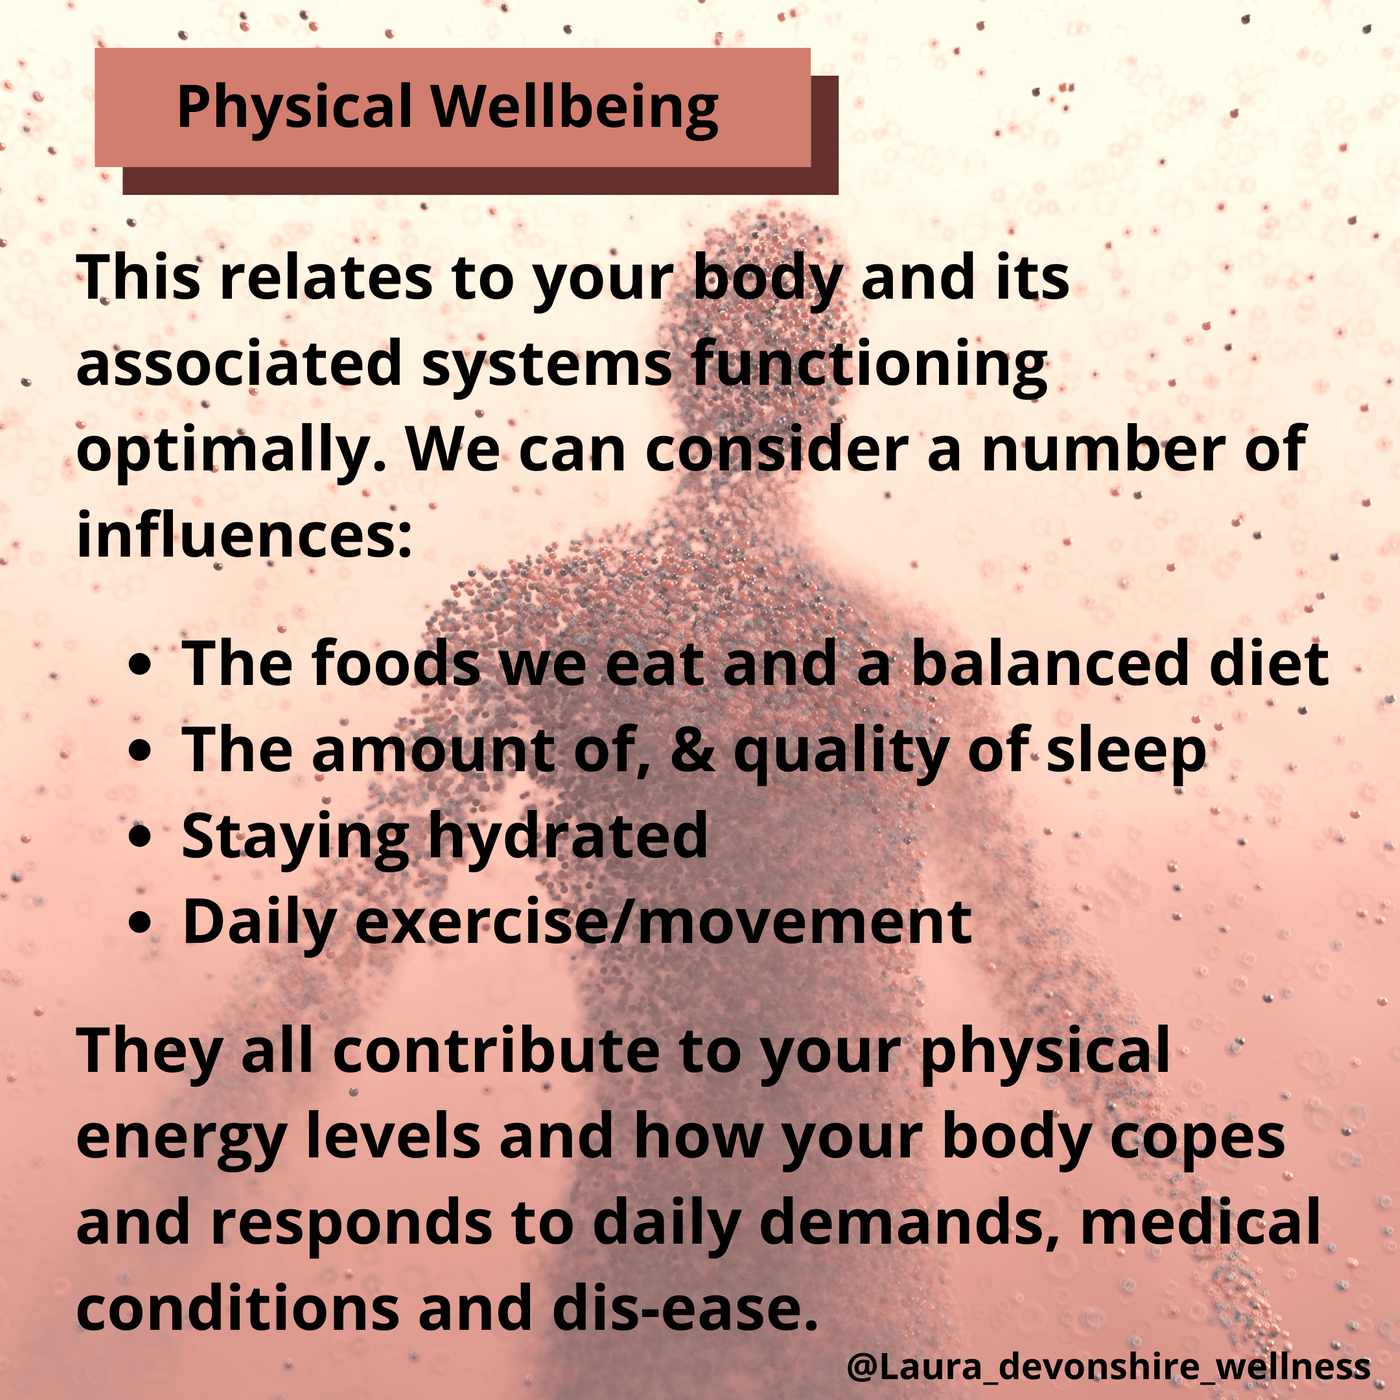 What is Holistic Wellness? 
The word ‘Holistic’ derives from ‘Holism’, with Greek roots ‘Holos’, meaning whole, complete, entire. 
The pictures above capture 5 aspects that contribute to our whole way of being:
✨Physical 
✨Mental 
✨Emotional 
✨Spiritual
✨Social